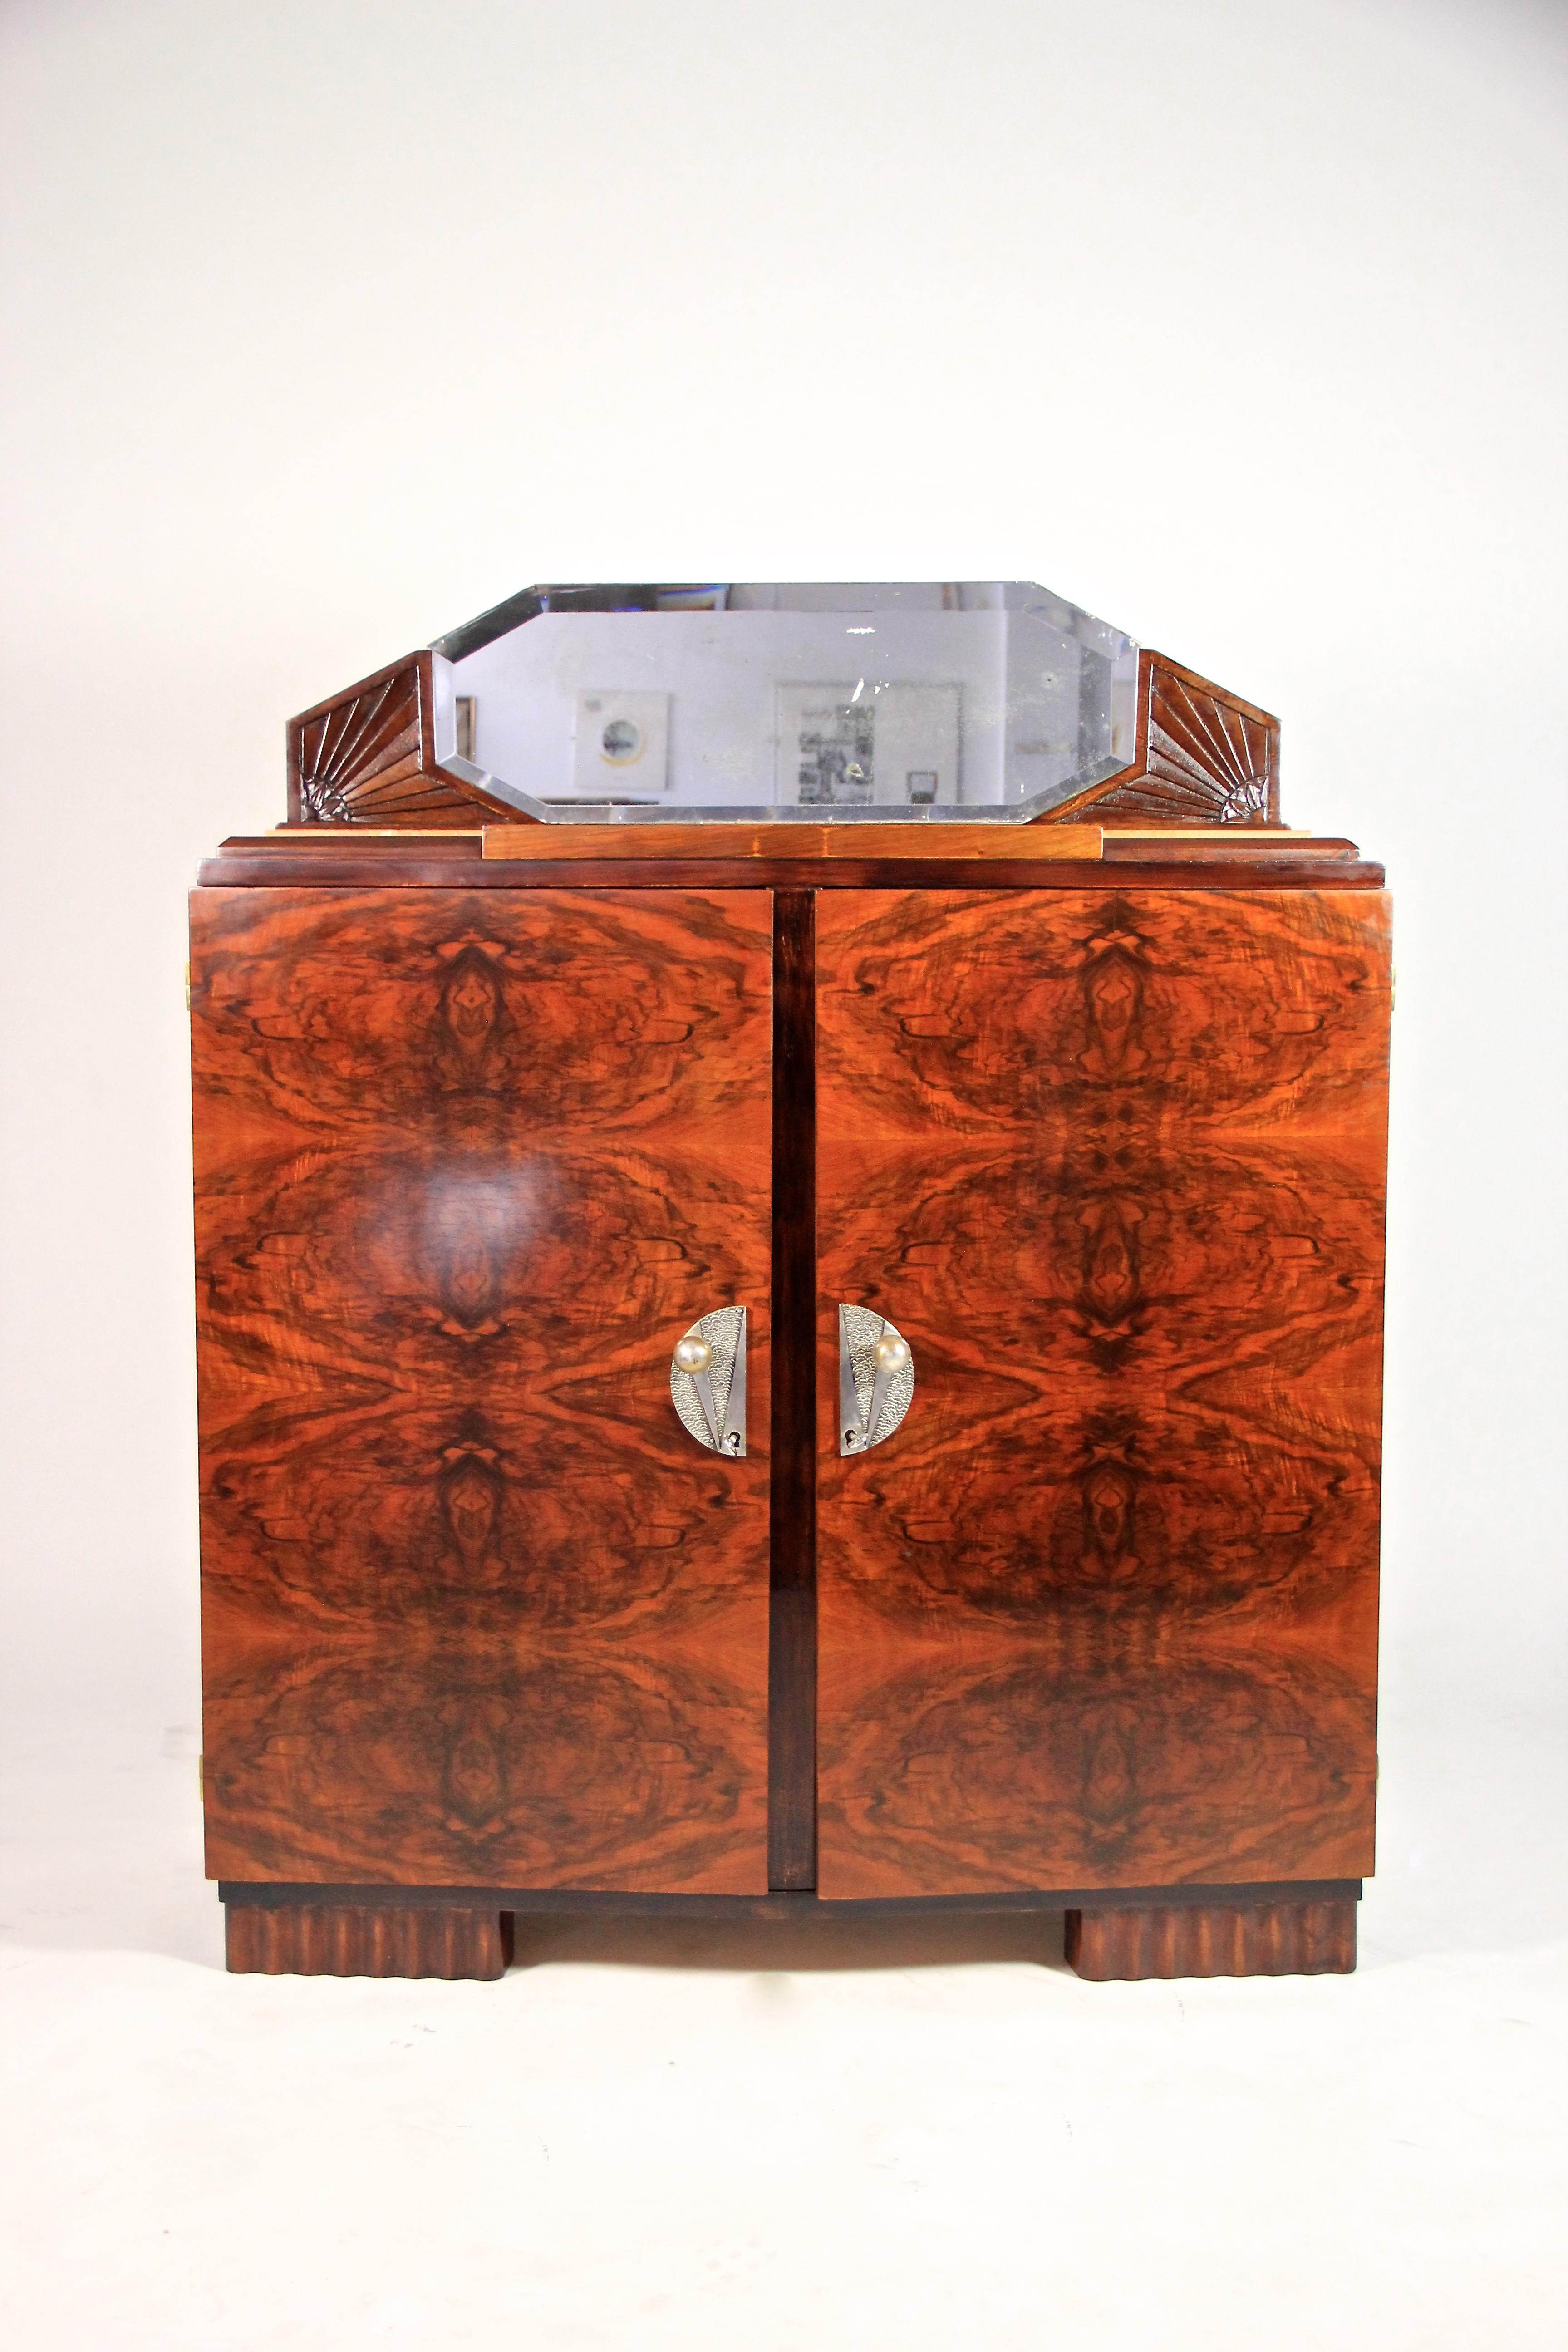 Phenomenal Art Deco commode or buffet from the period around 1925 in France. Amazing bookmatched burr walnut on the front was set in a very impressive manner and gives this fantastic designed Art Deco buffet an absolute great appearance. The divided